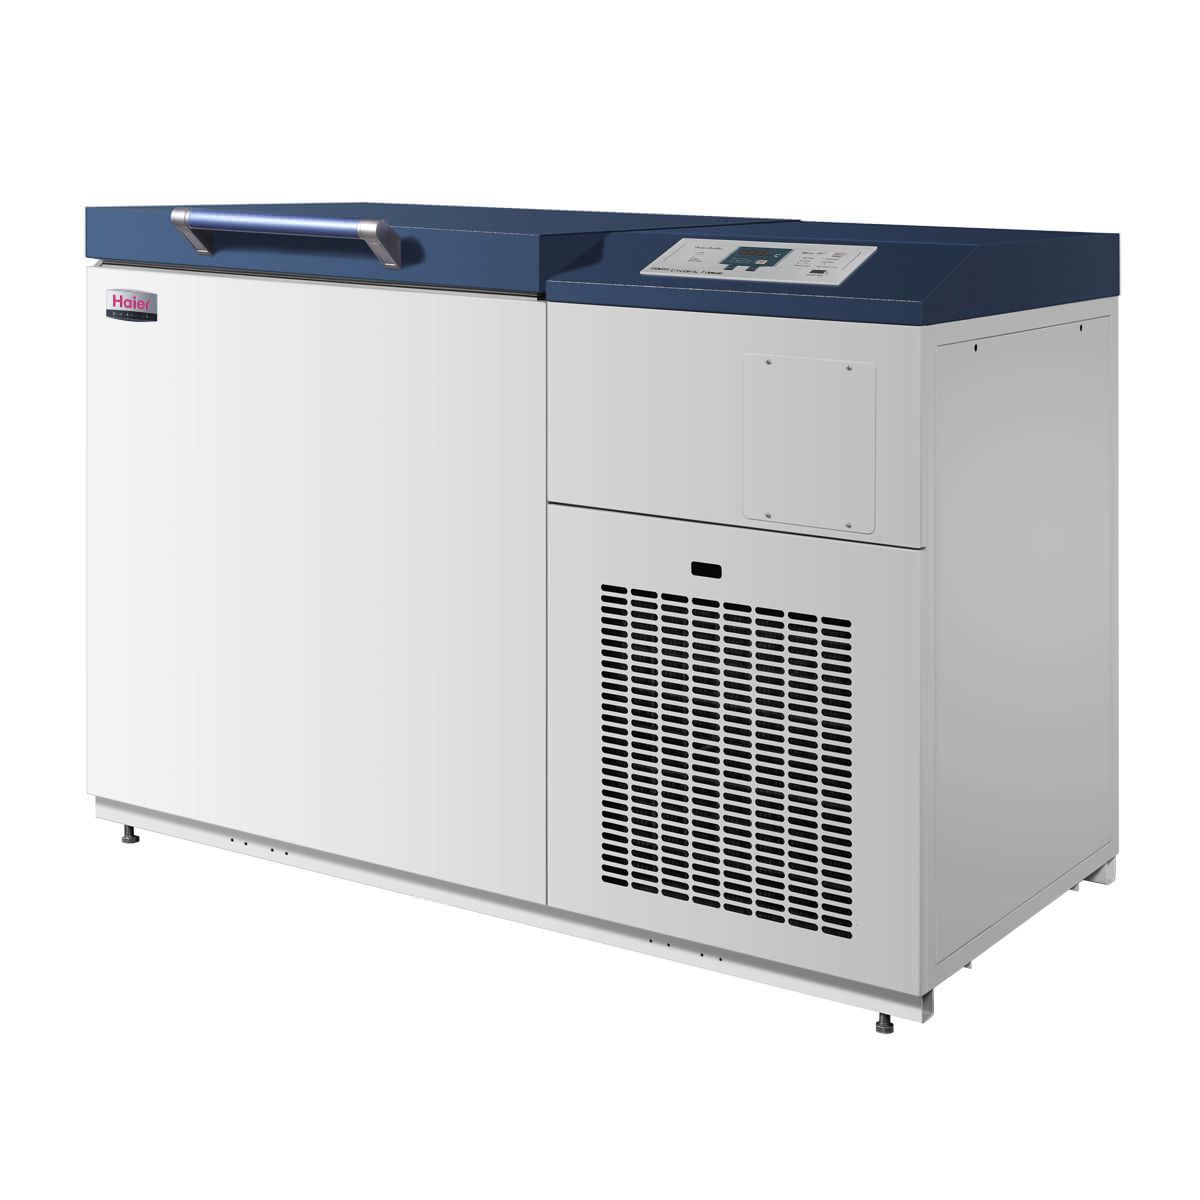 Laboratory freezer / chest / cryogenic / 1-door -150 °C, 200 L | DW-150W200 Haier Medical and Laboratory Products